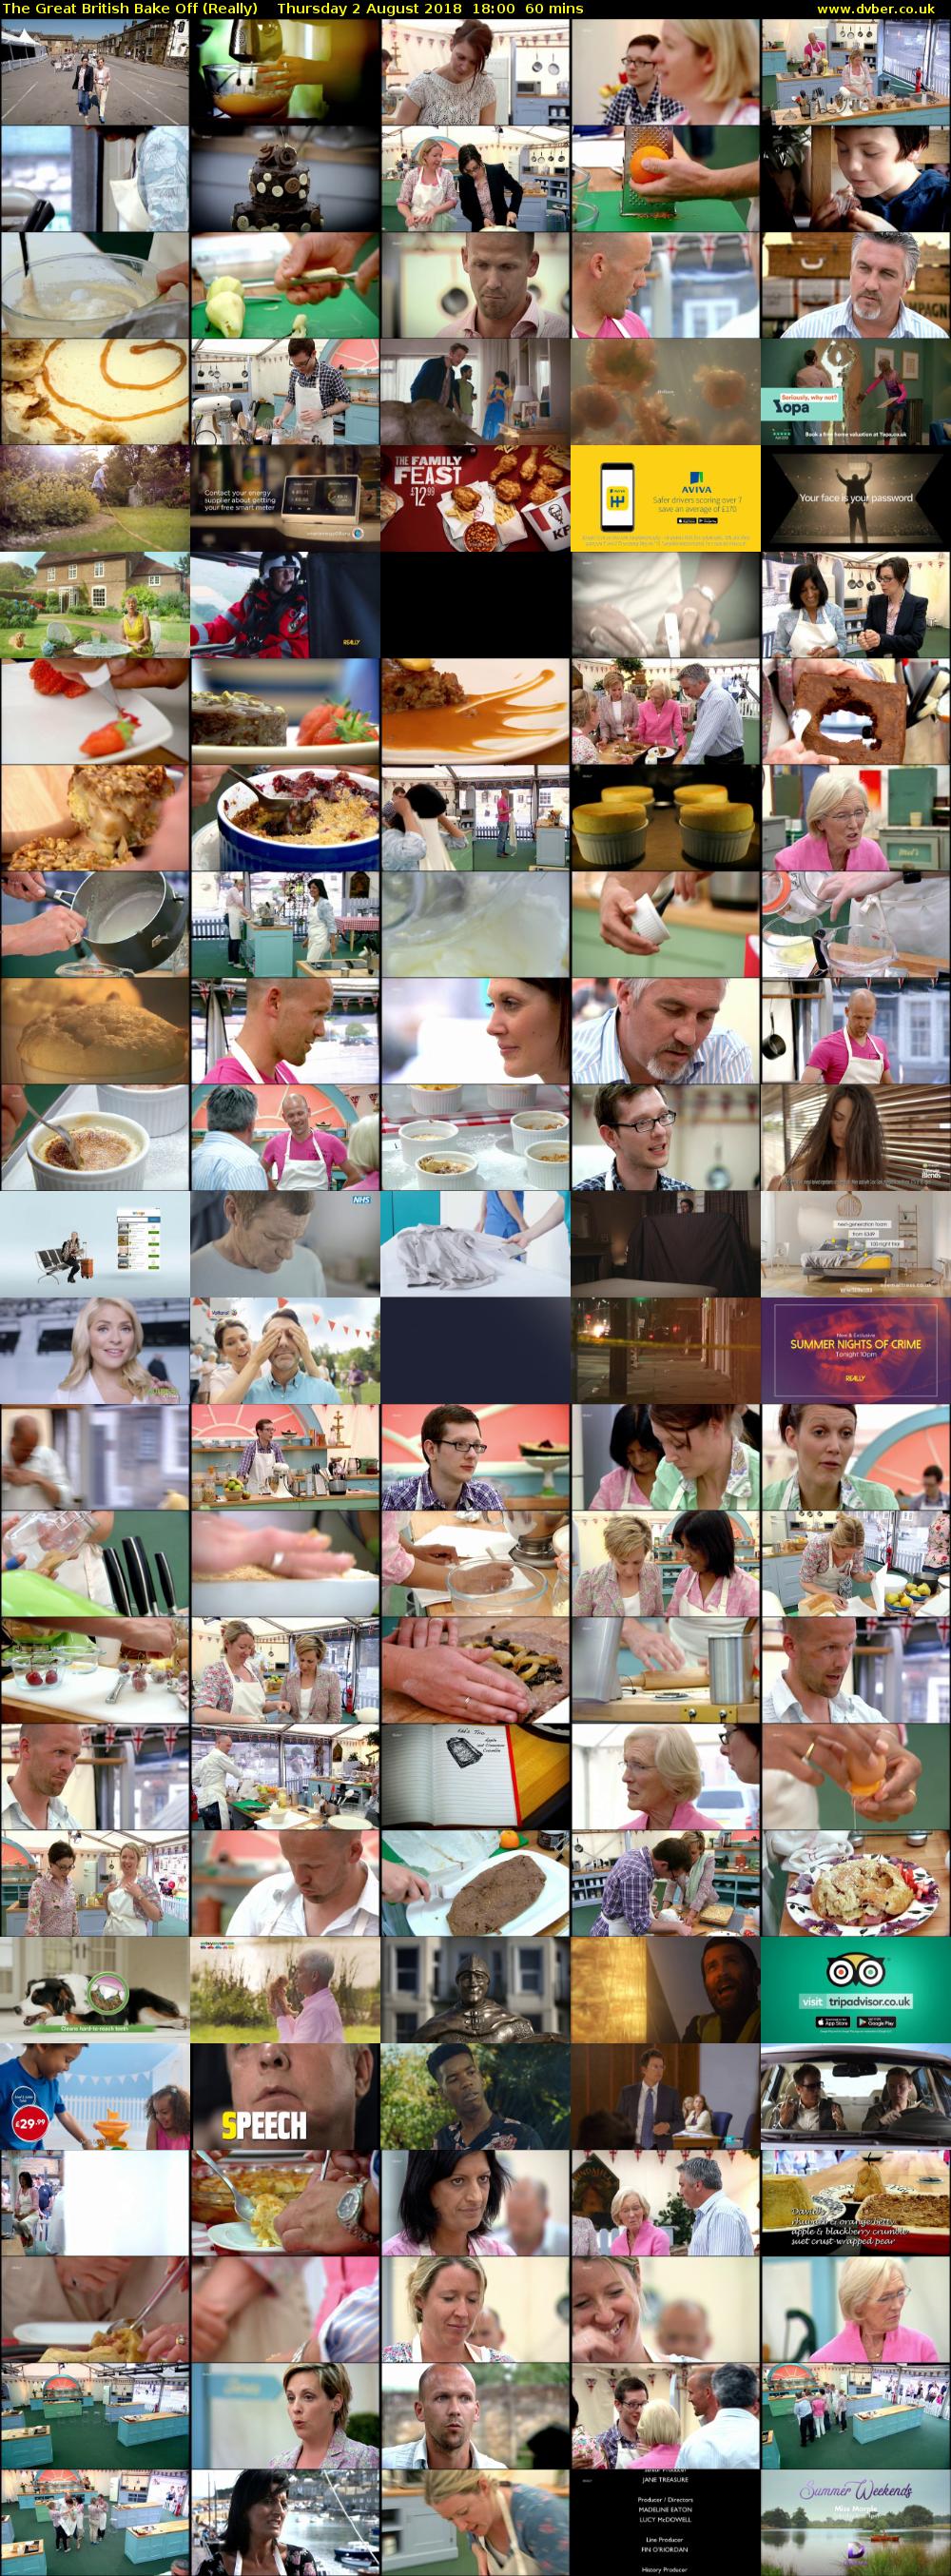 The Great British Bake Off (Really) Thursday 2 August 2018 18:00 - 19:00